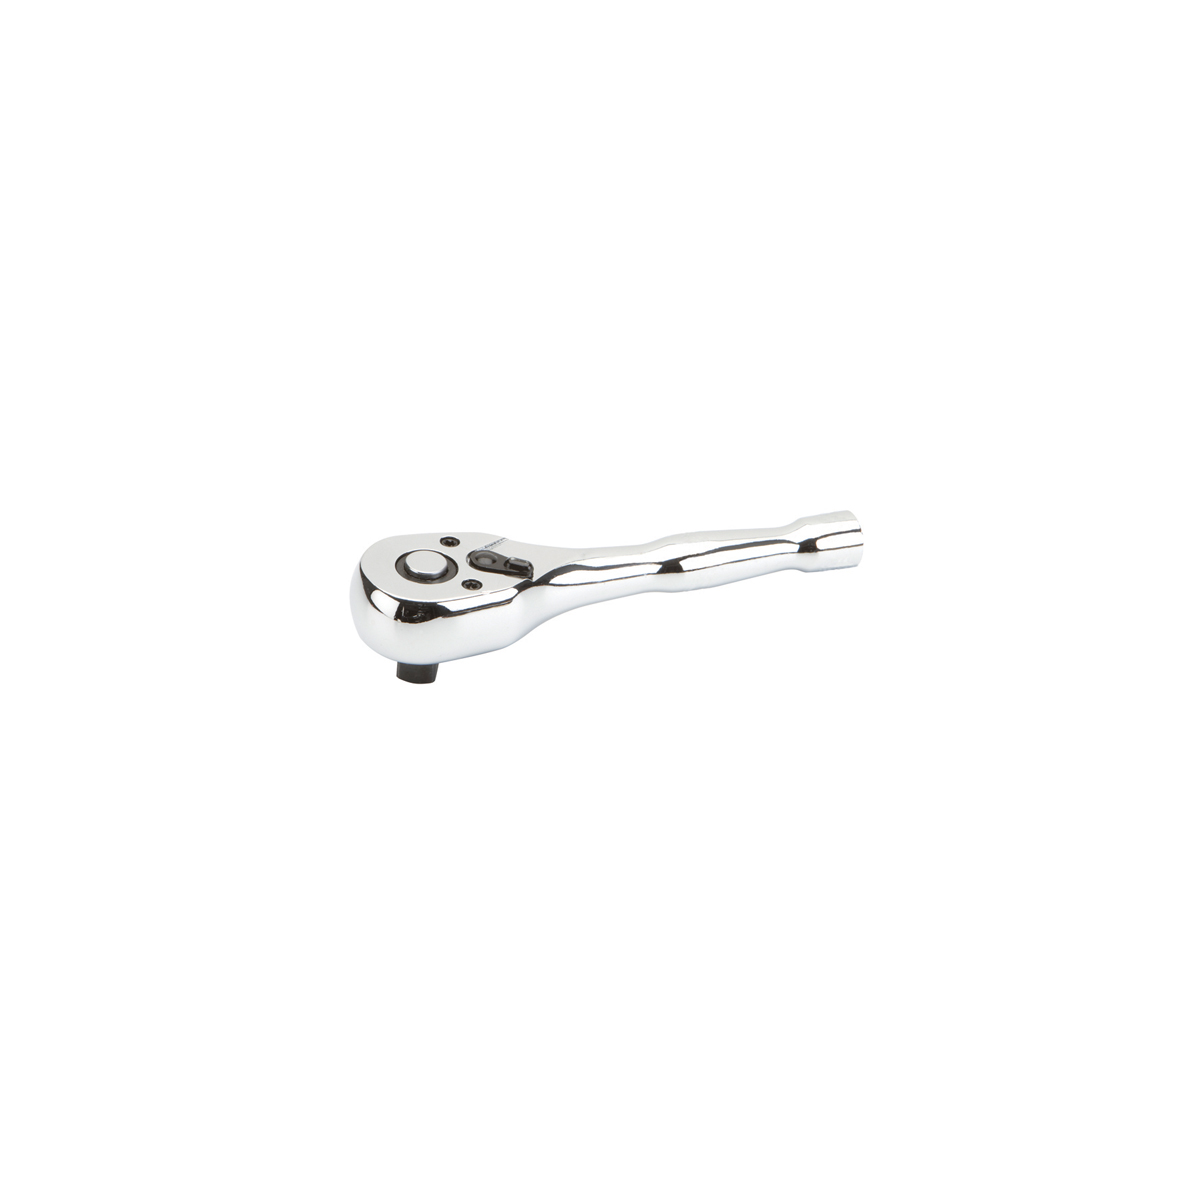 PITTSBURGH 1/4 in. Drive Quick Release Stubby Ratchet - Item 62191